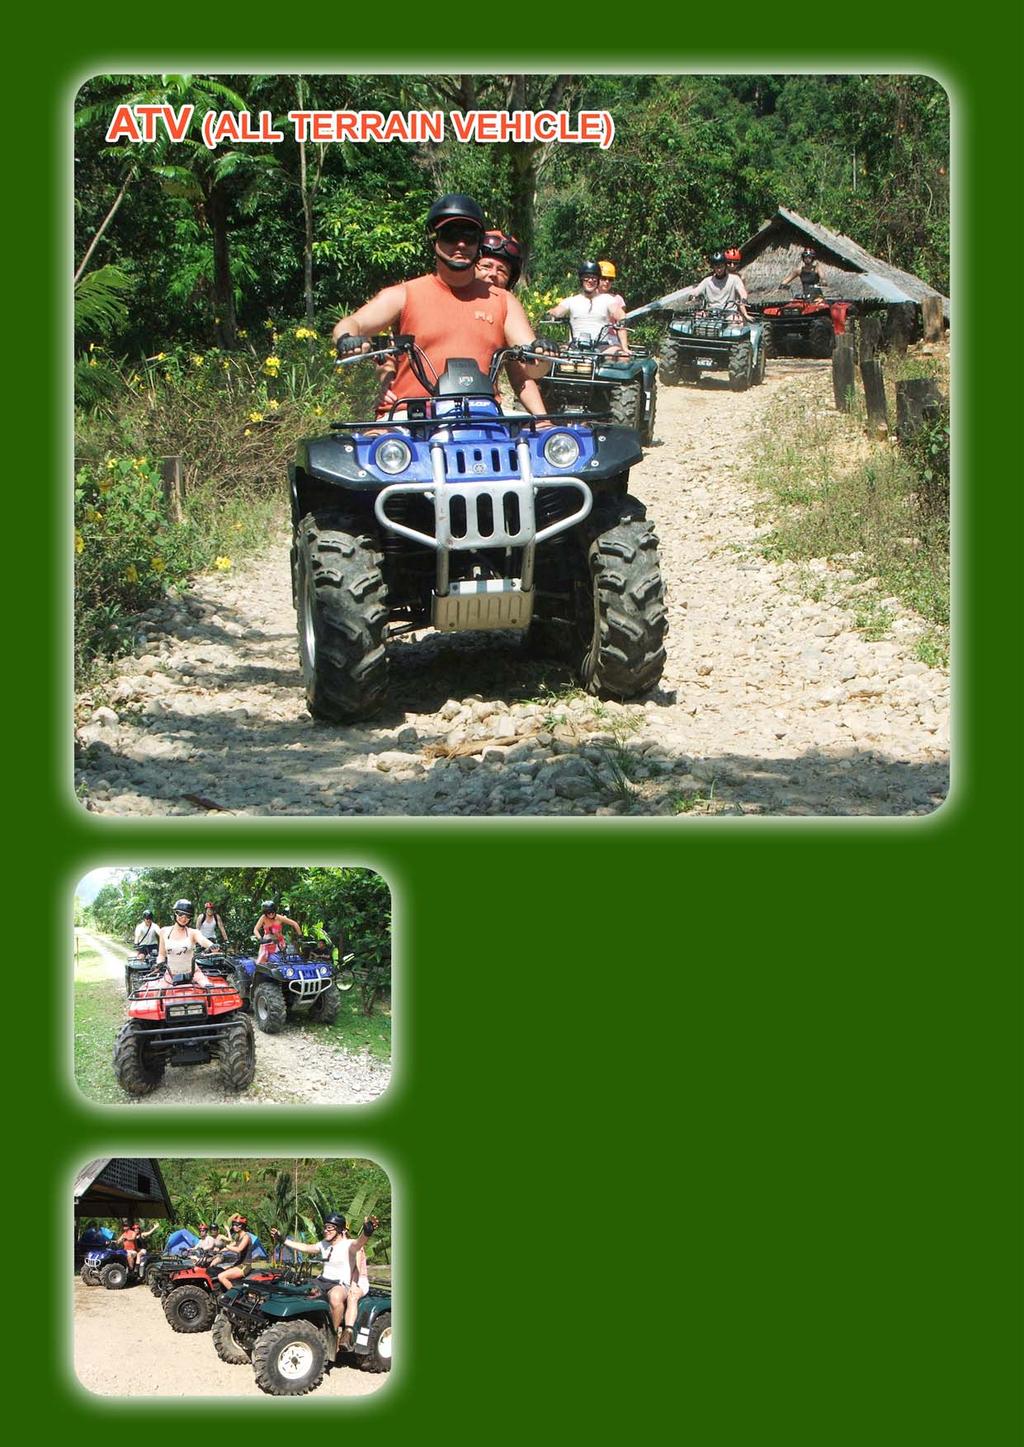 ATV (All Terrain vehicle) Tour Code (SLC 05) Experience the excitement over